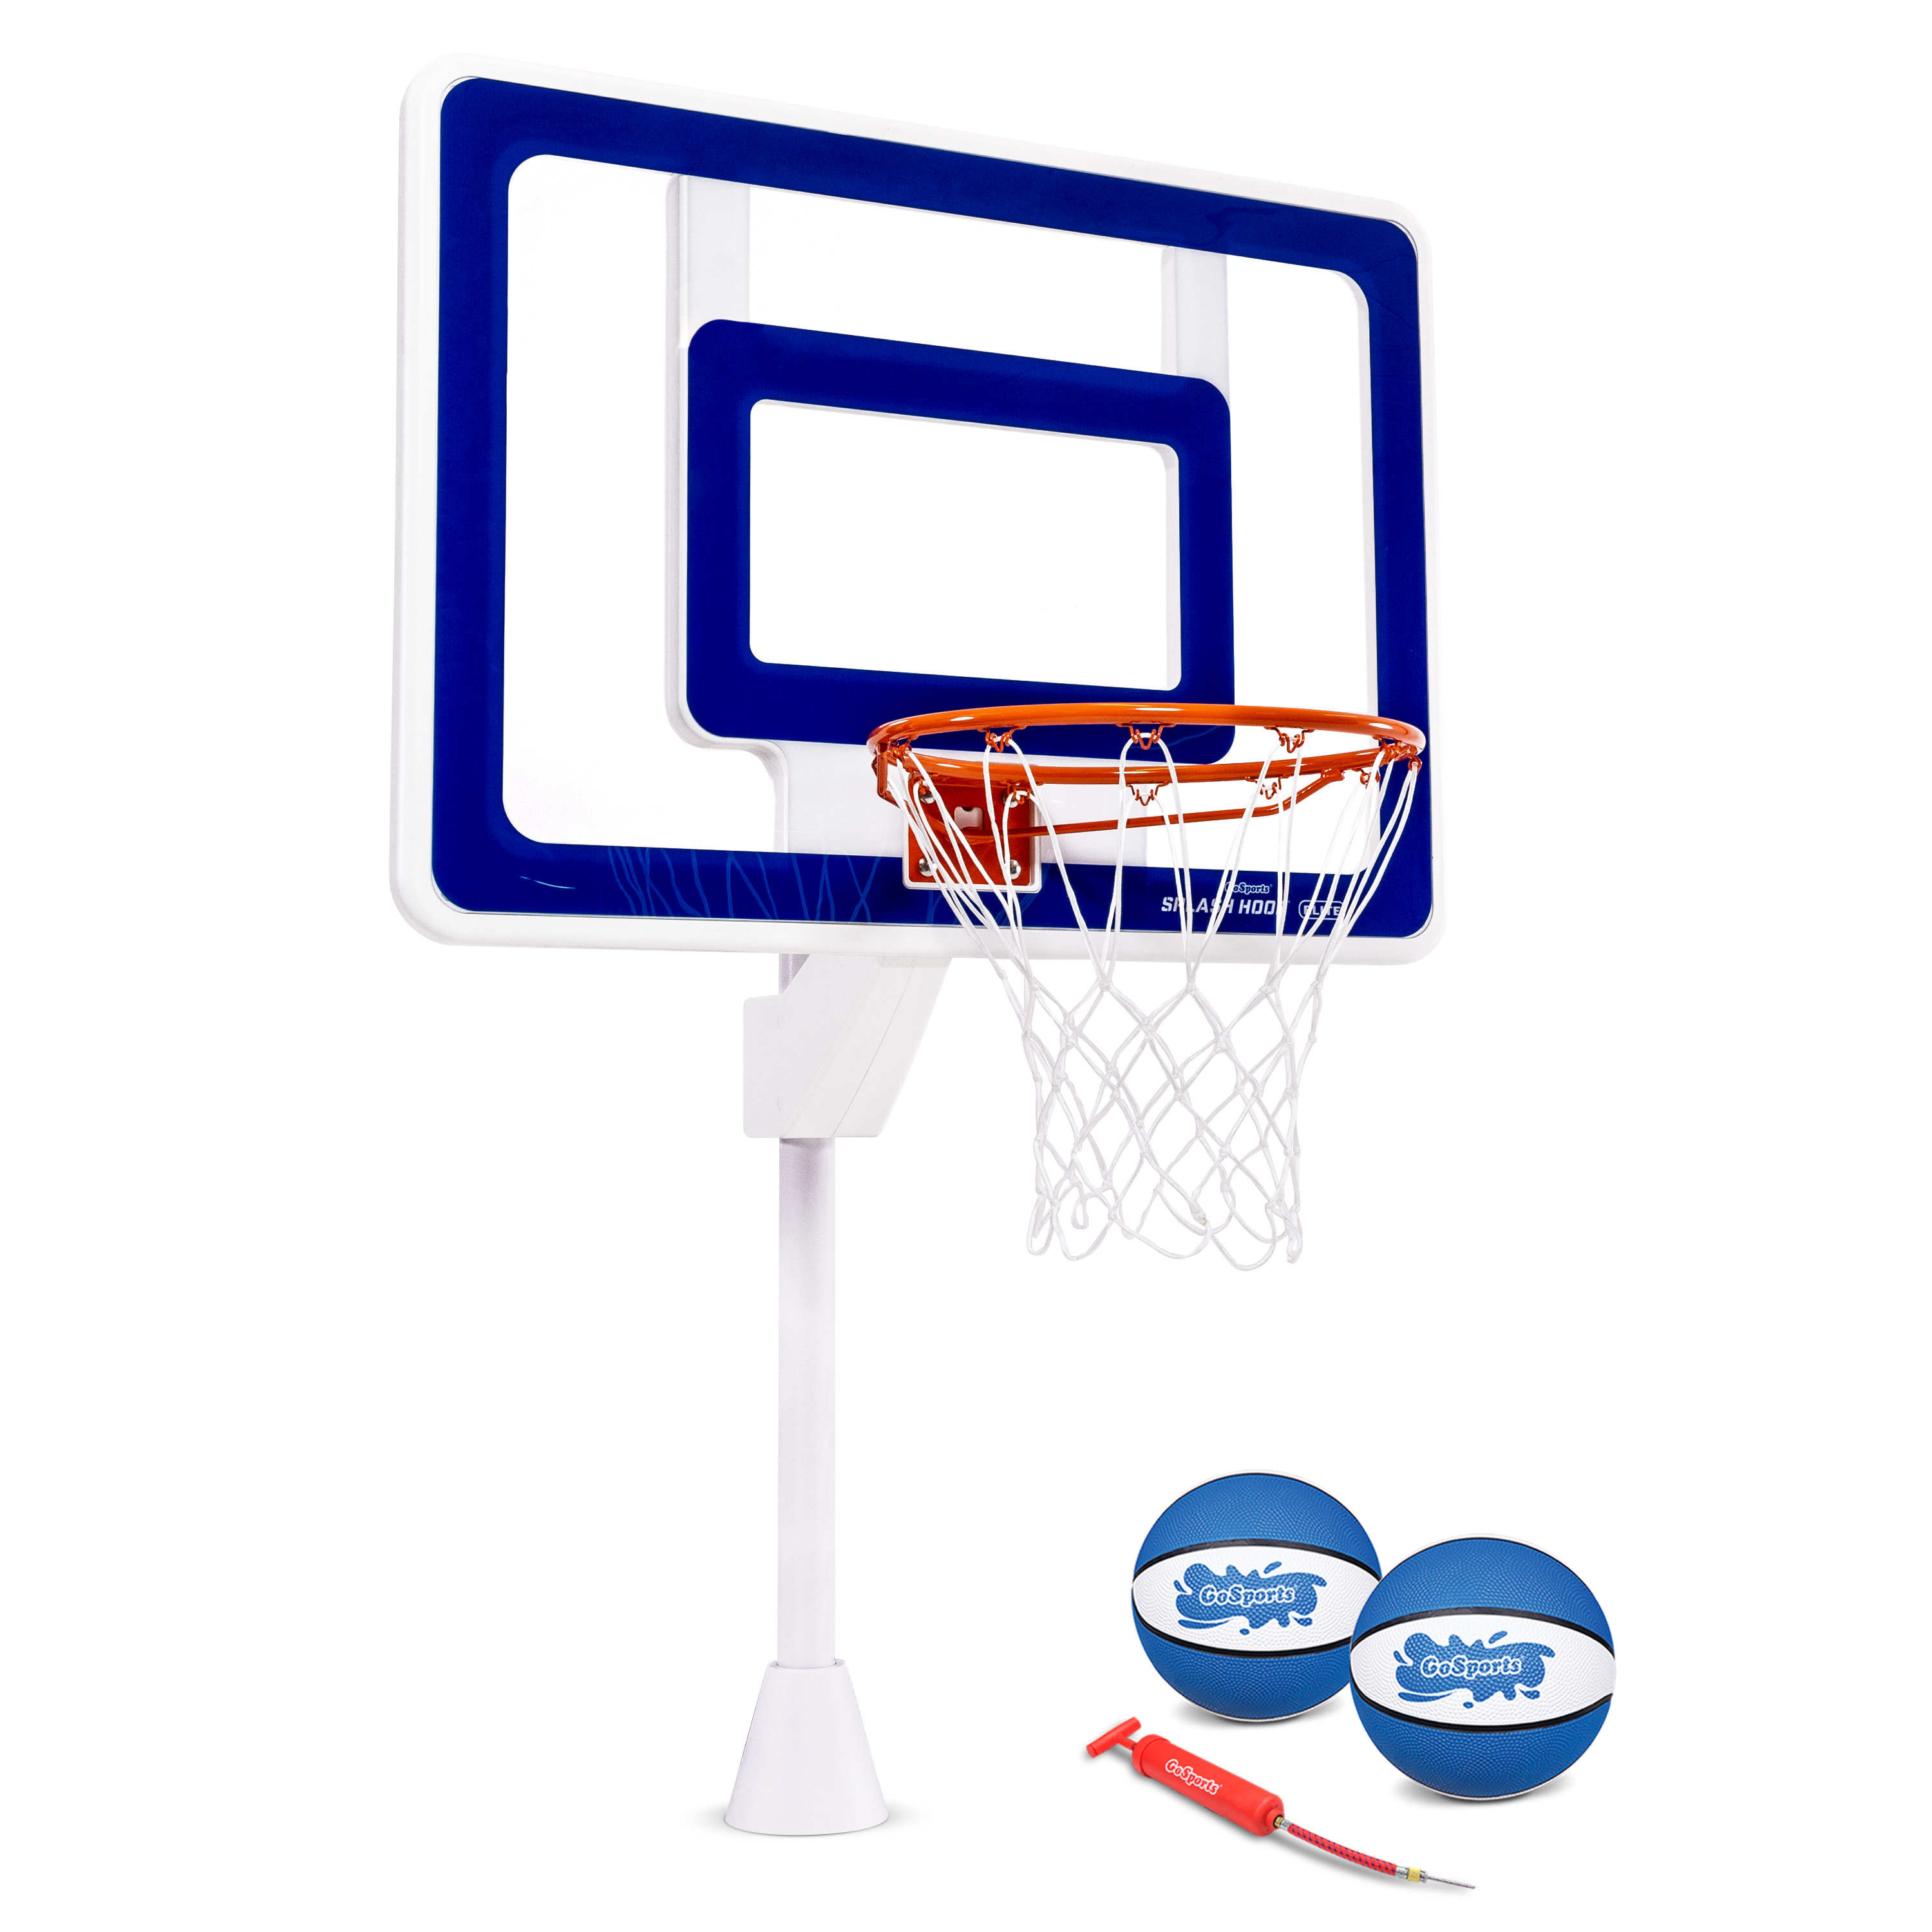  MoNiBloom Mini Basketball Hoop for Adults 18 x 13 Portable  Door Transparent Board Basketball Hoops for Garage Room Office Wall Mounted  Basketball Game Gifts for Teens, White : Sports 